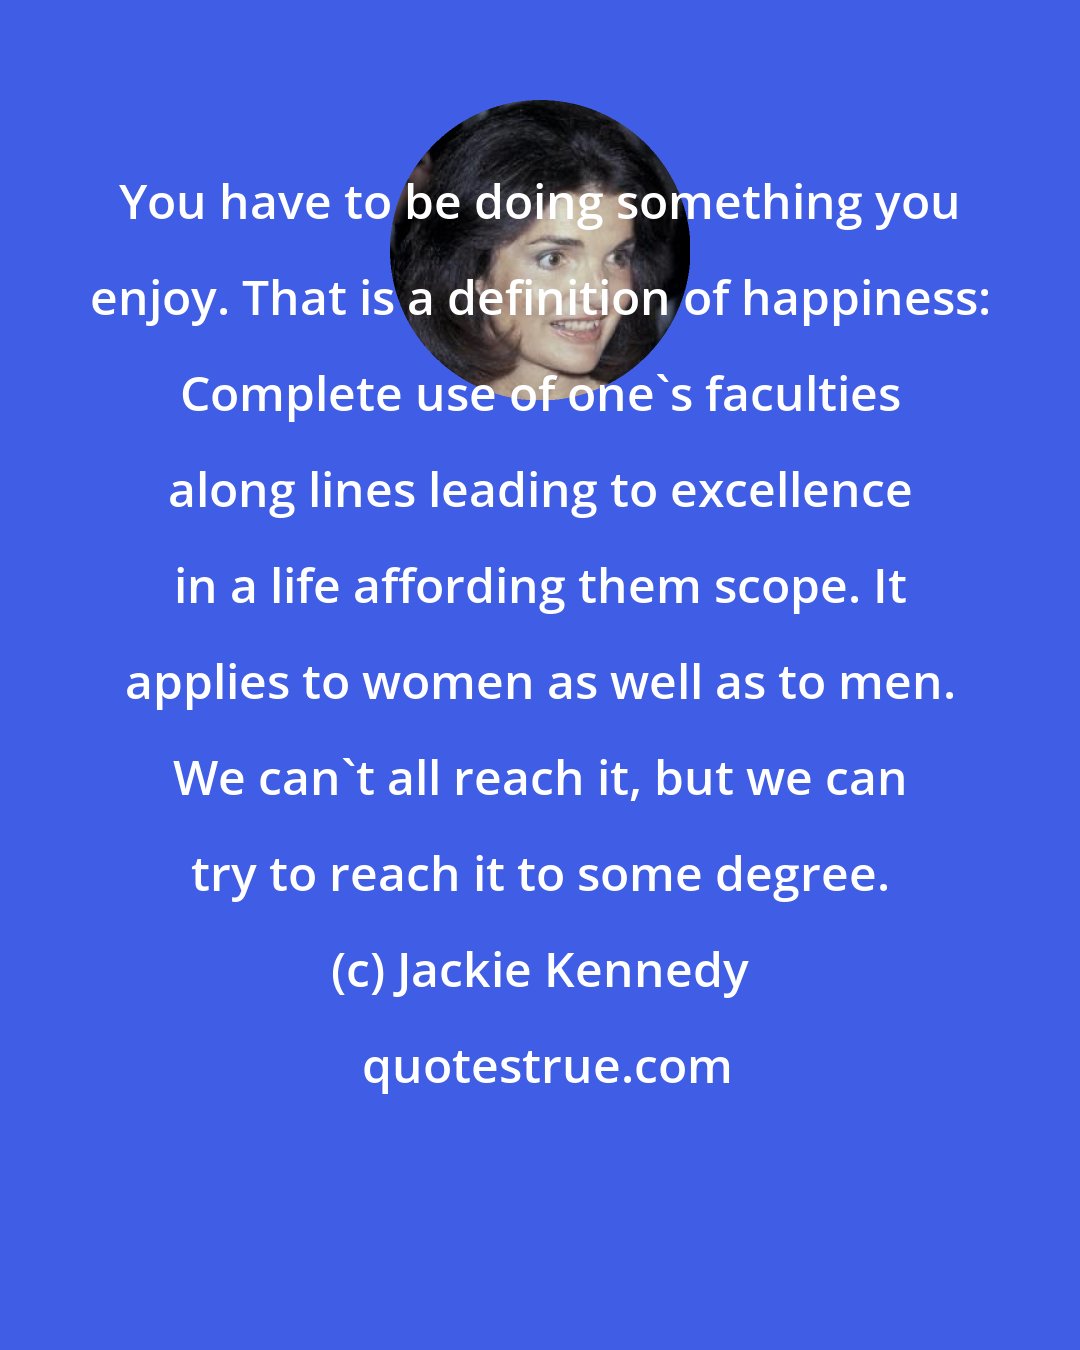 Jackie Kennedy: You have to be doing something you enjoy. That is a definition of happiness: Complete use of one's faculties along lines leading to excellence in a life affording them scope. It applies to women as well as to men. We can't all reach it, but we can try to reach it to some degree.